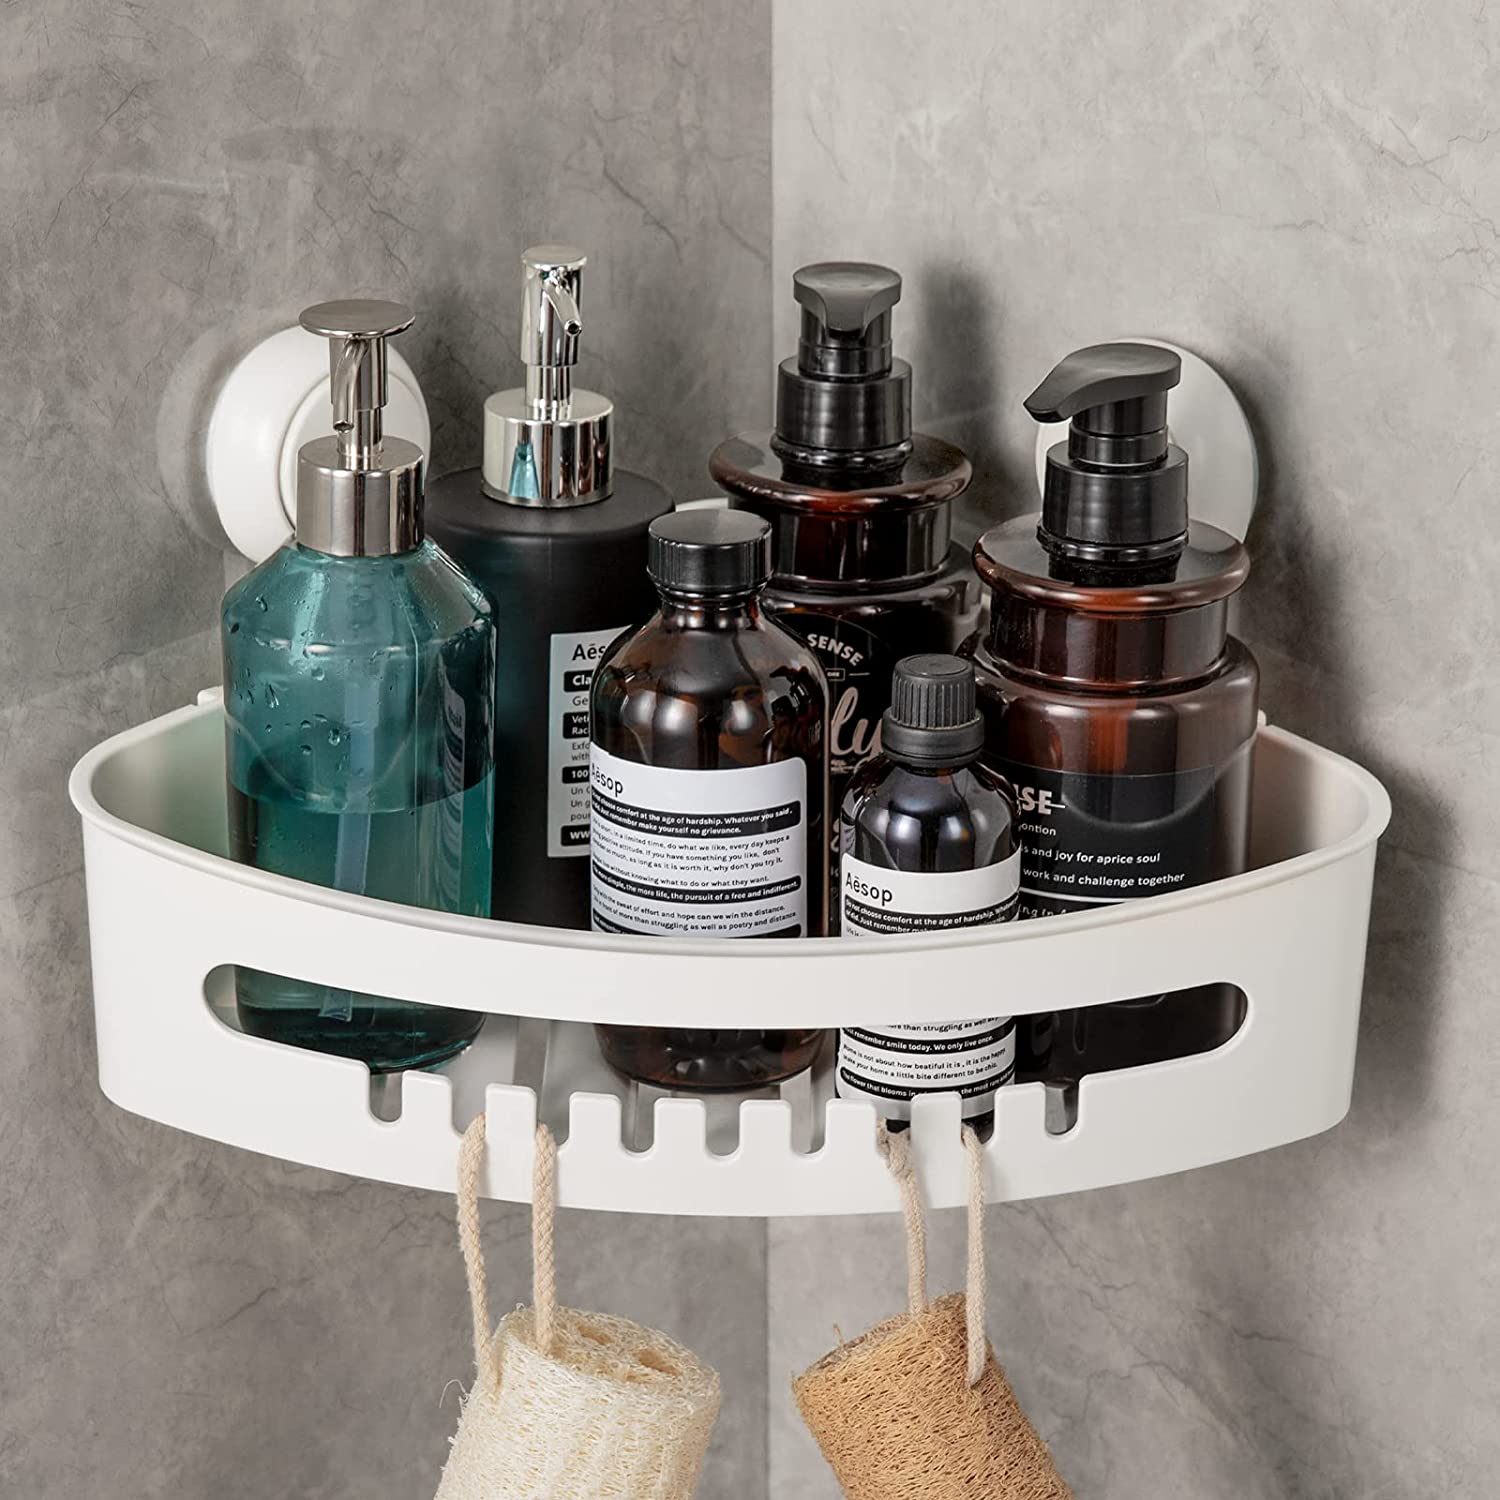 LEVERLOC Corner Shower Caddy Suction Cup NO-Drilling